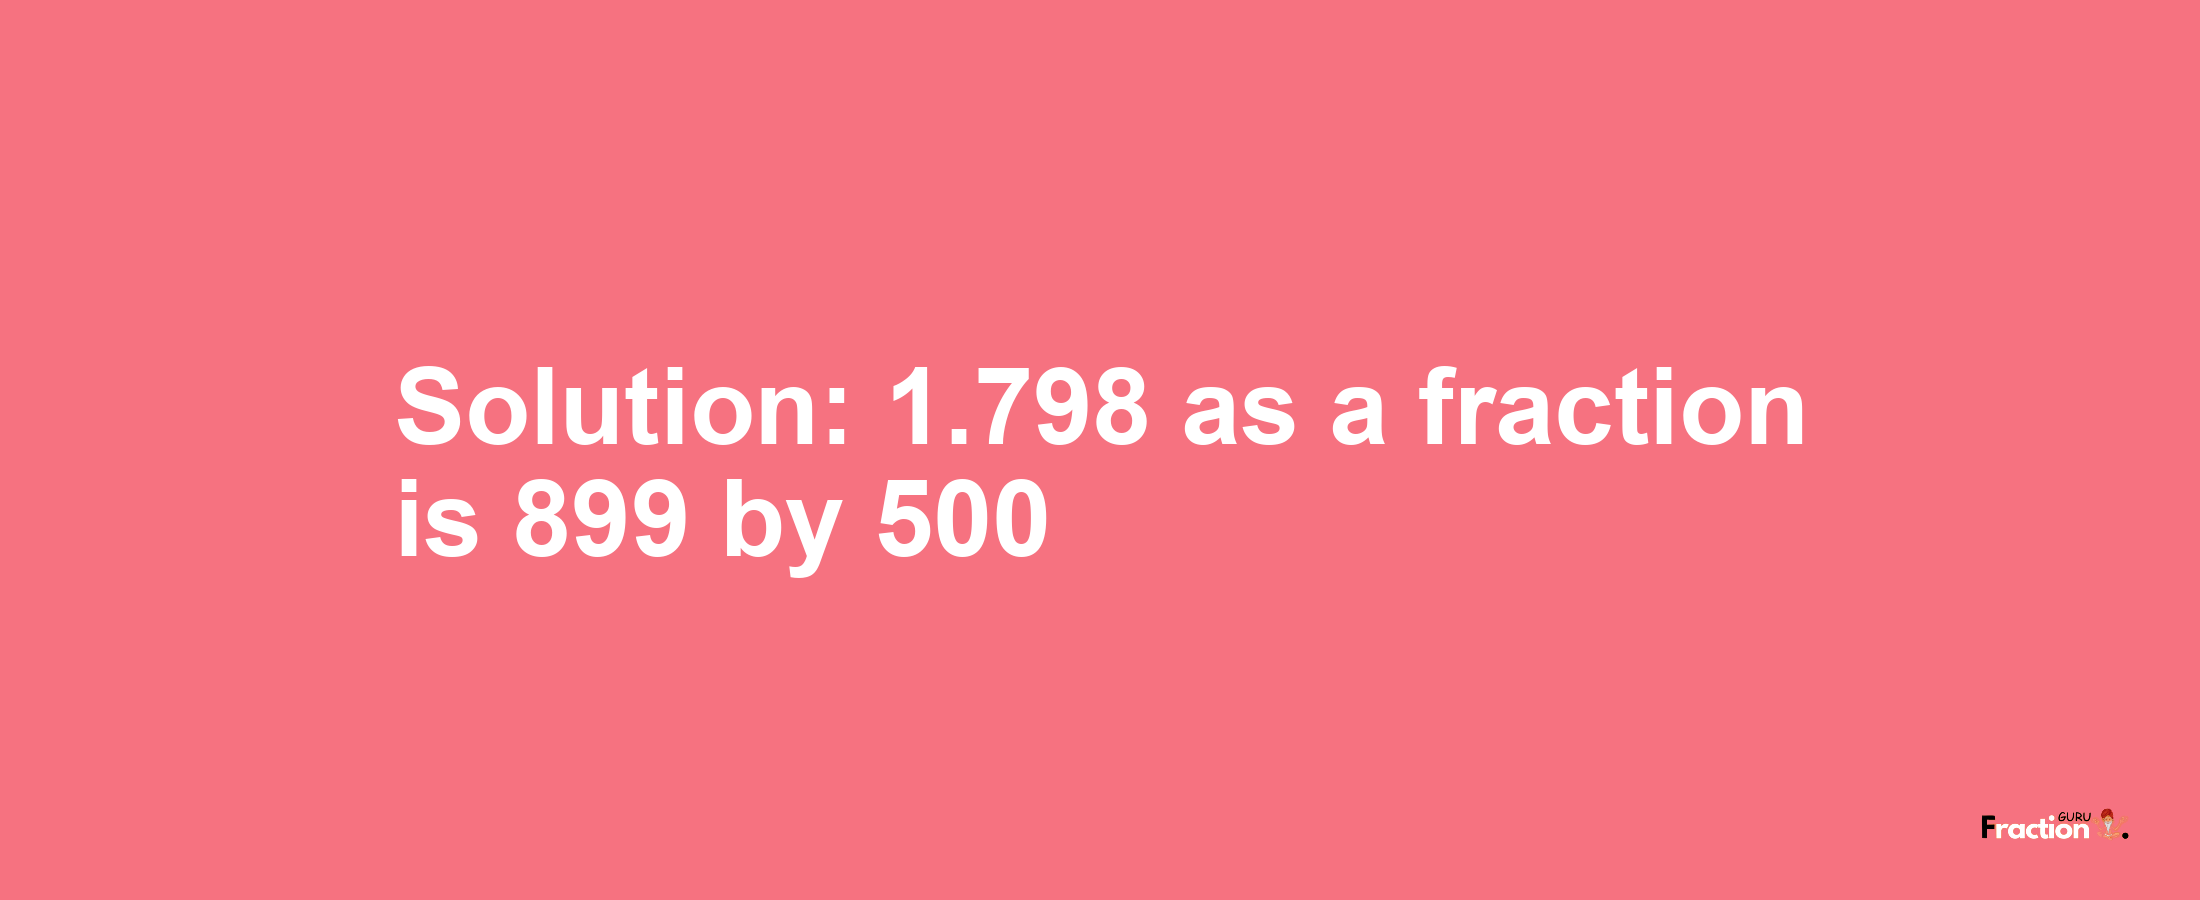 Solution:1.798 as a fraction is 899/500